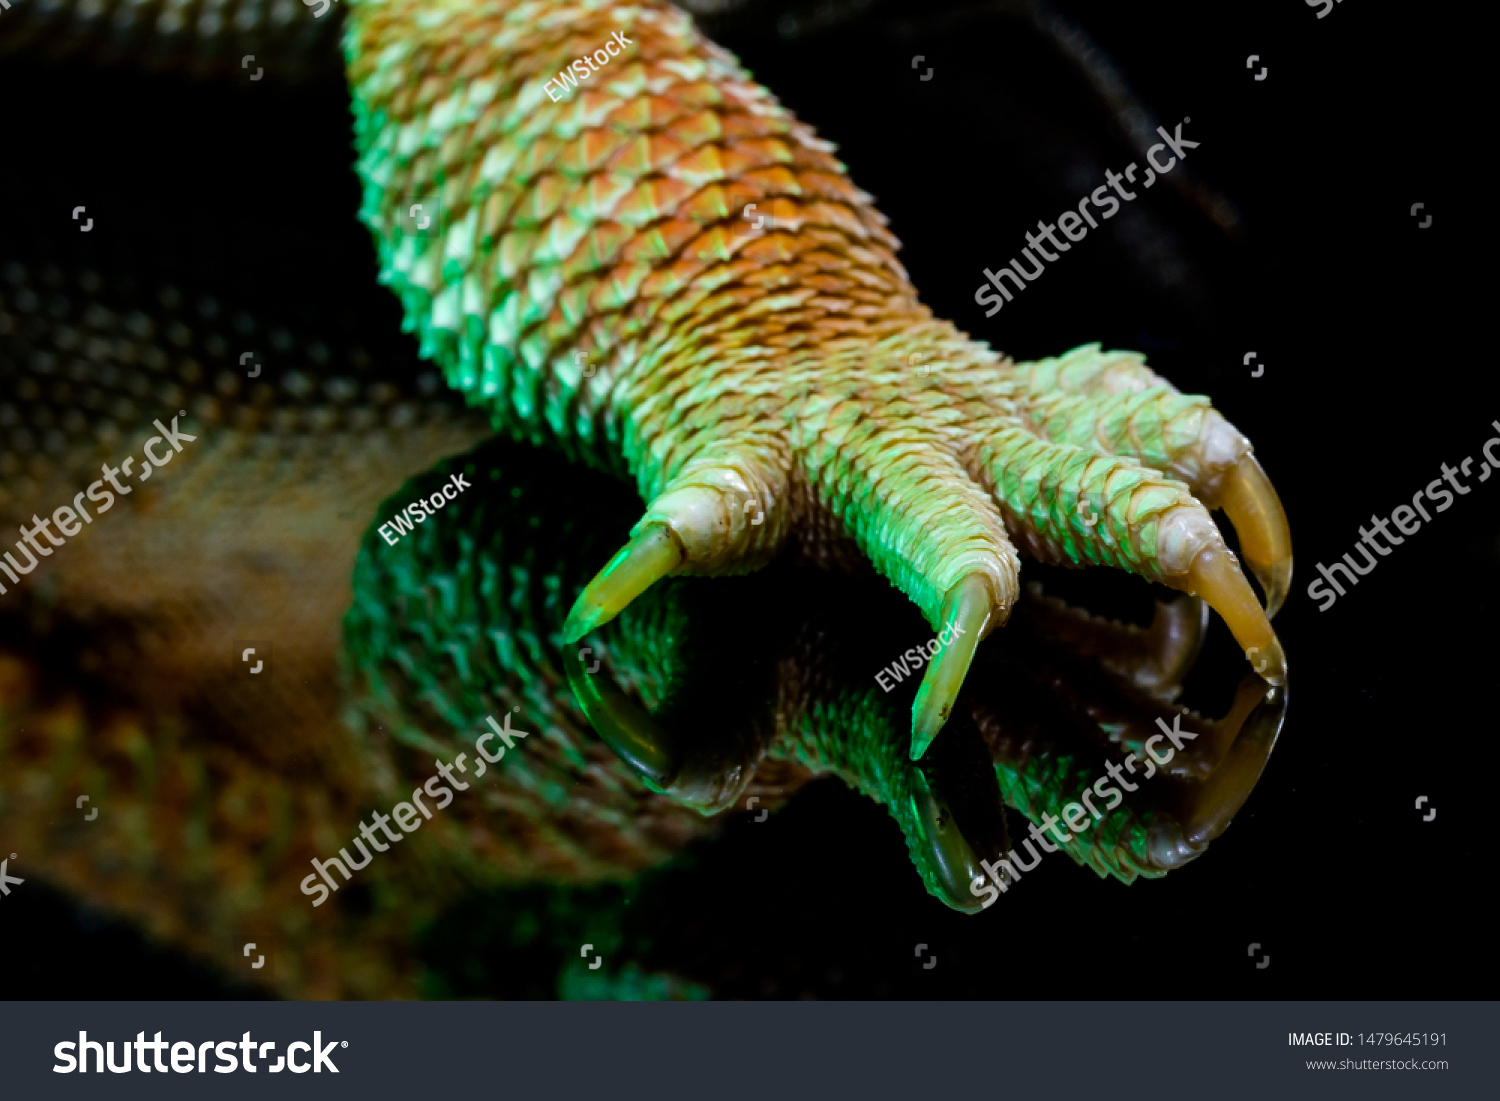 Stock Photo An Extreme Up Close Shot Of A Bearded Dragon S Claws On A Single Foot Reflected On A Black Mirror 1479645191 